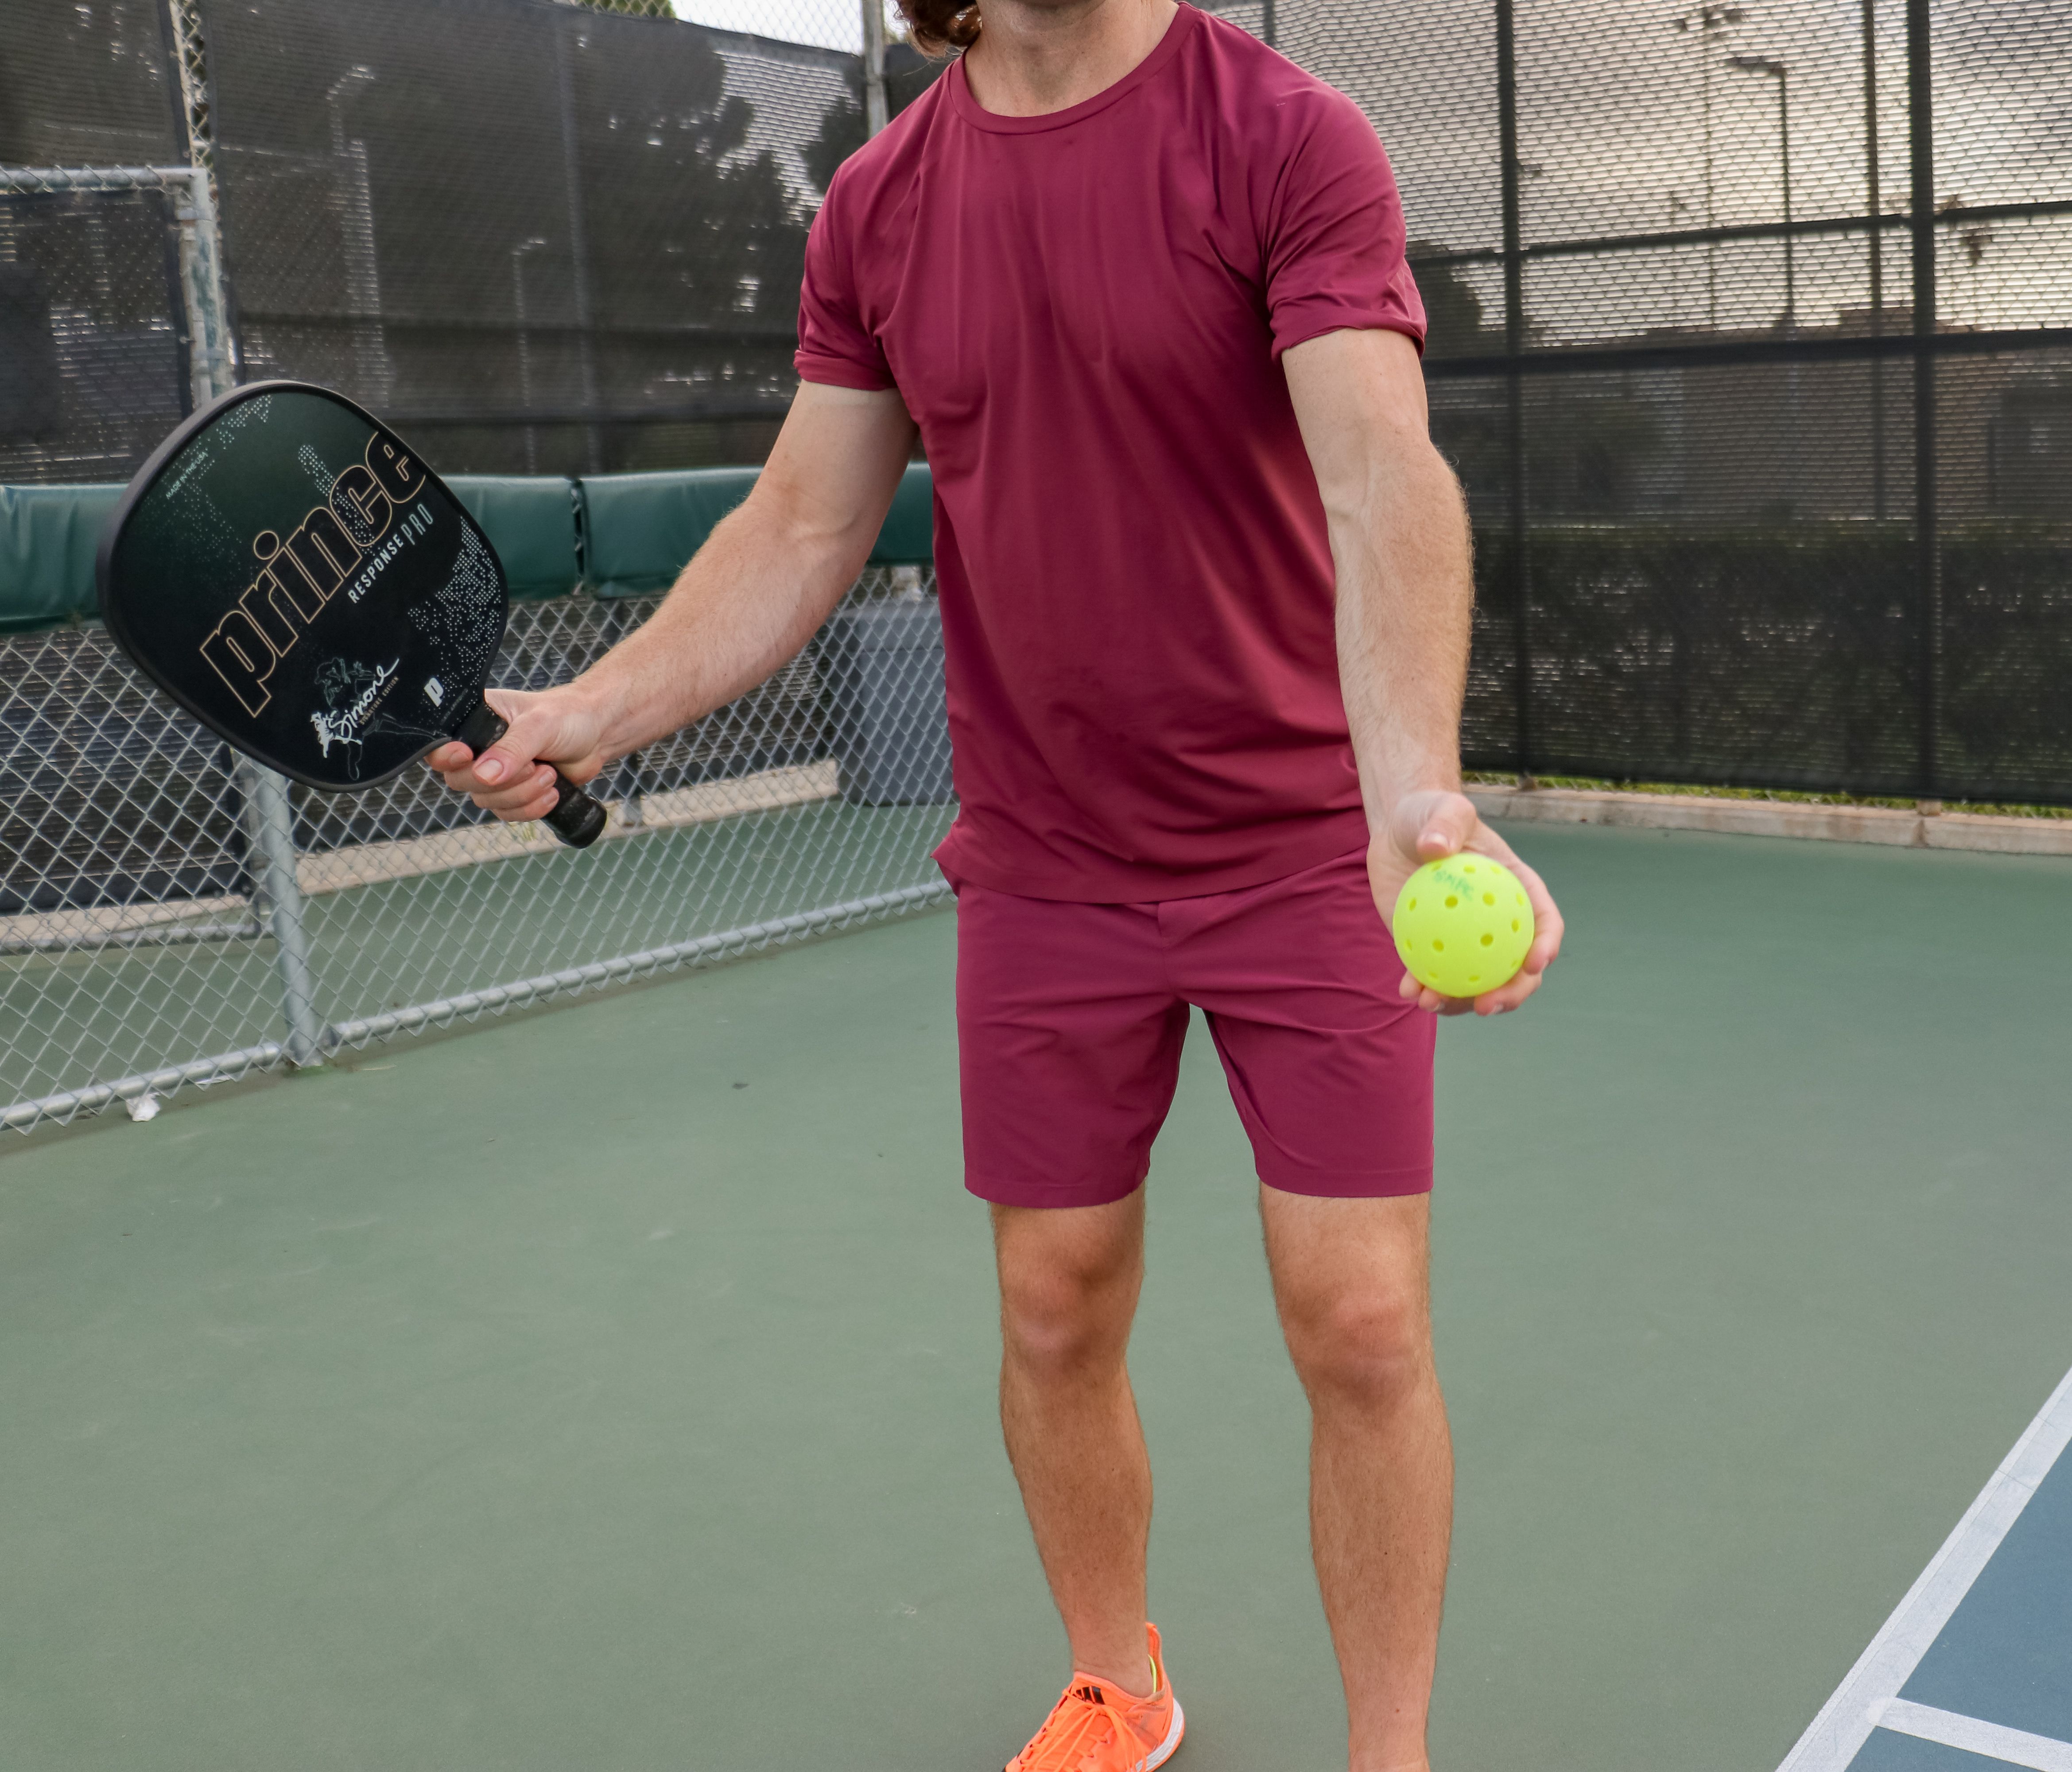 Player prepares to hit a ball during a serve